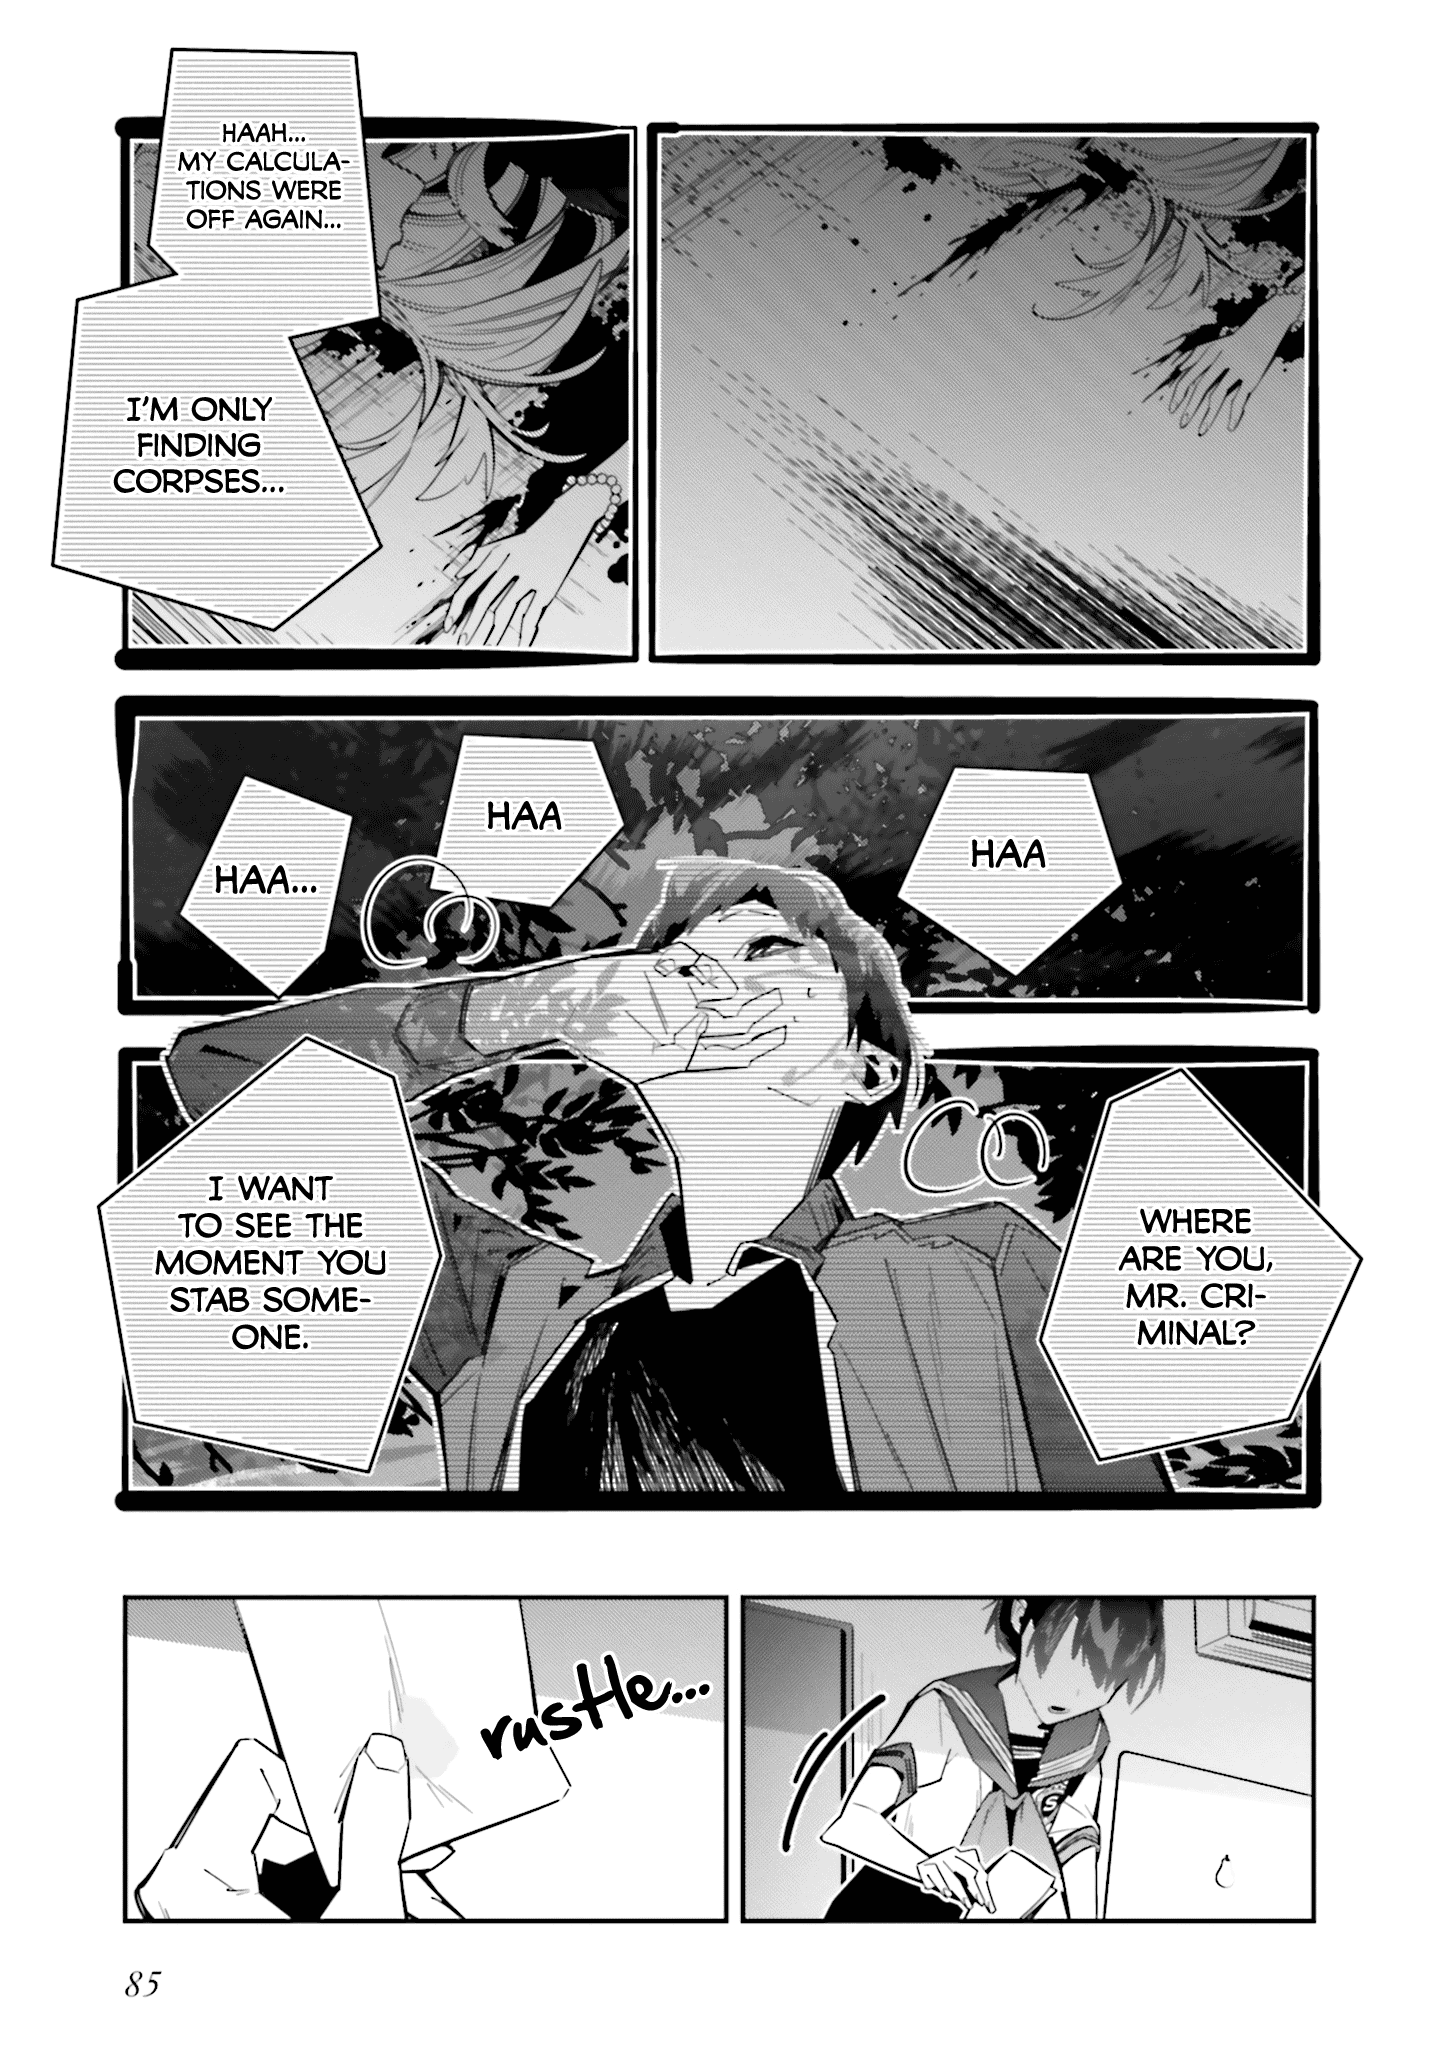 I Reincarnated As The Little Sister Of A Death Game Manga's Murder Mastermind And Failed Chapter 2 #32